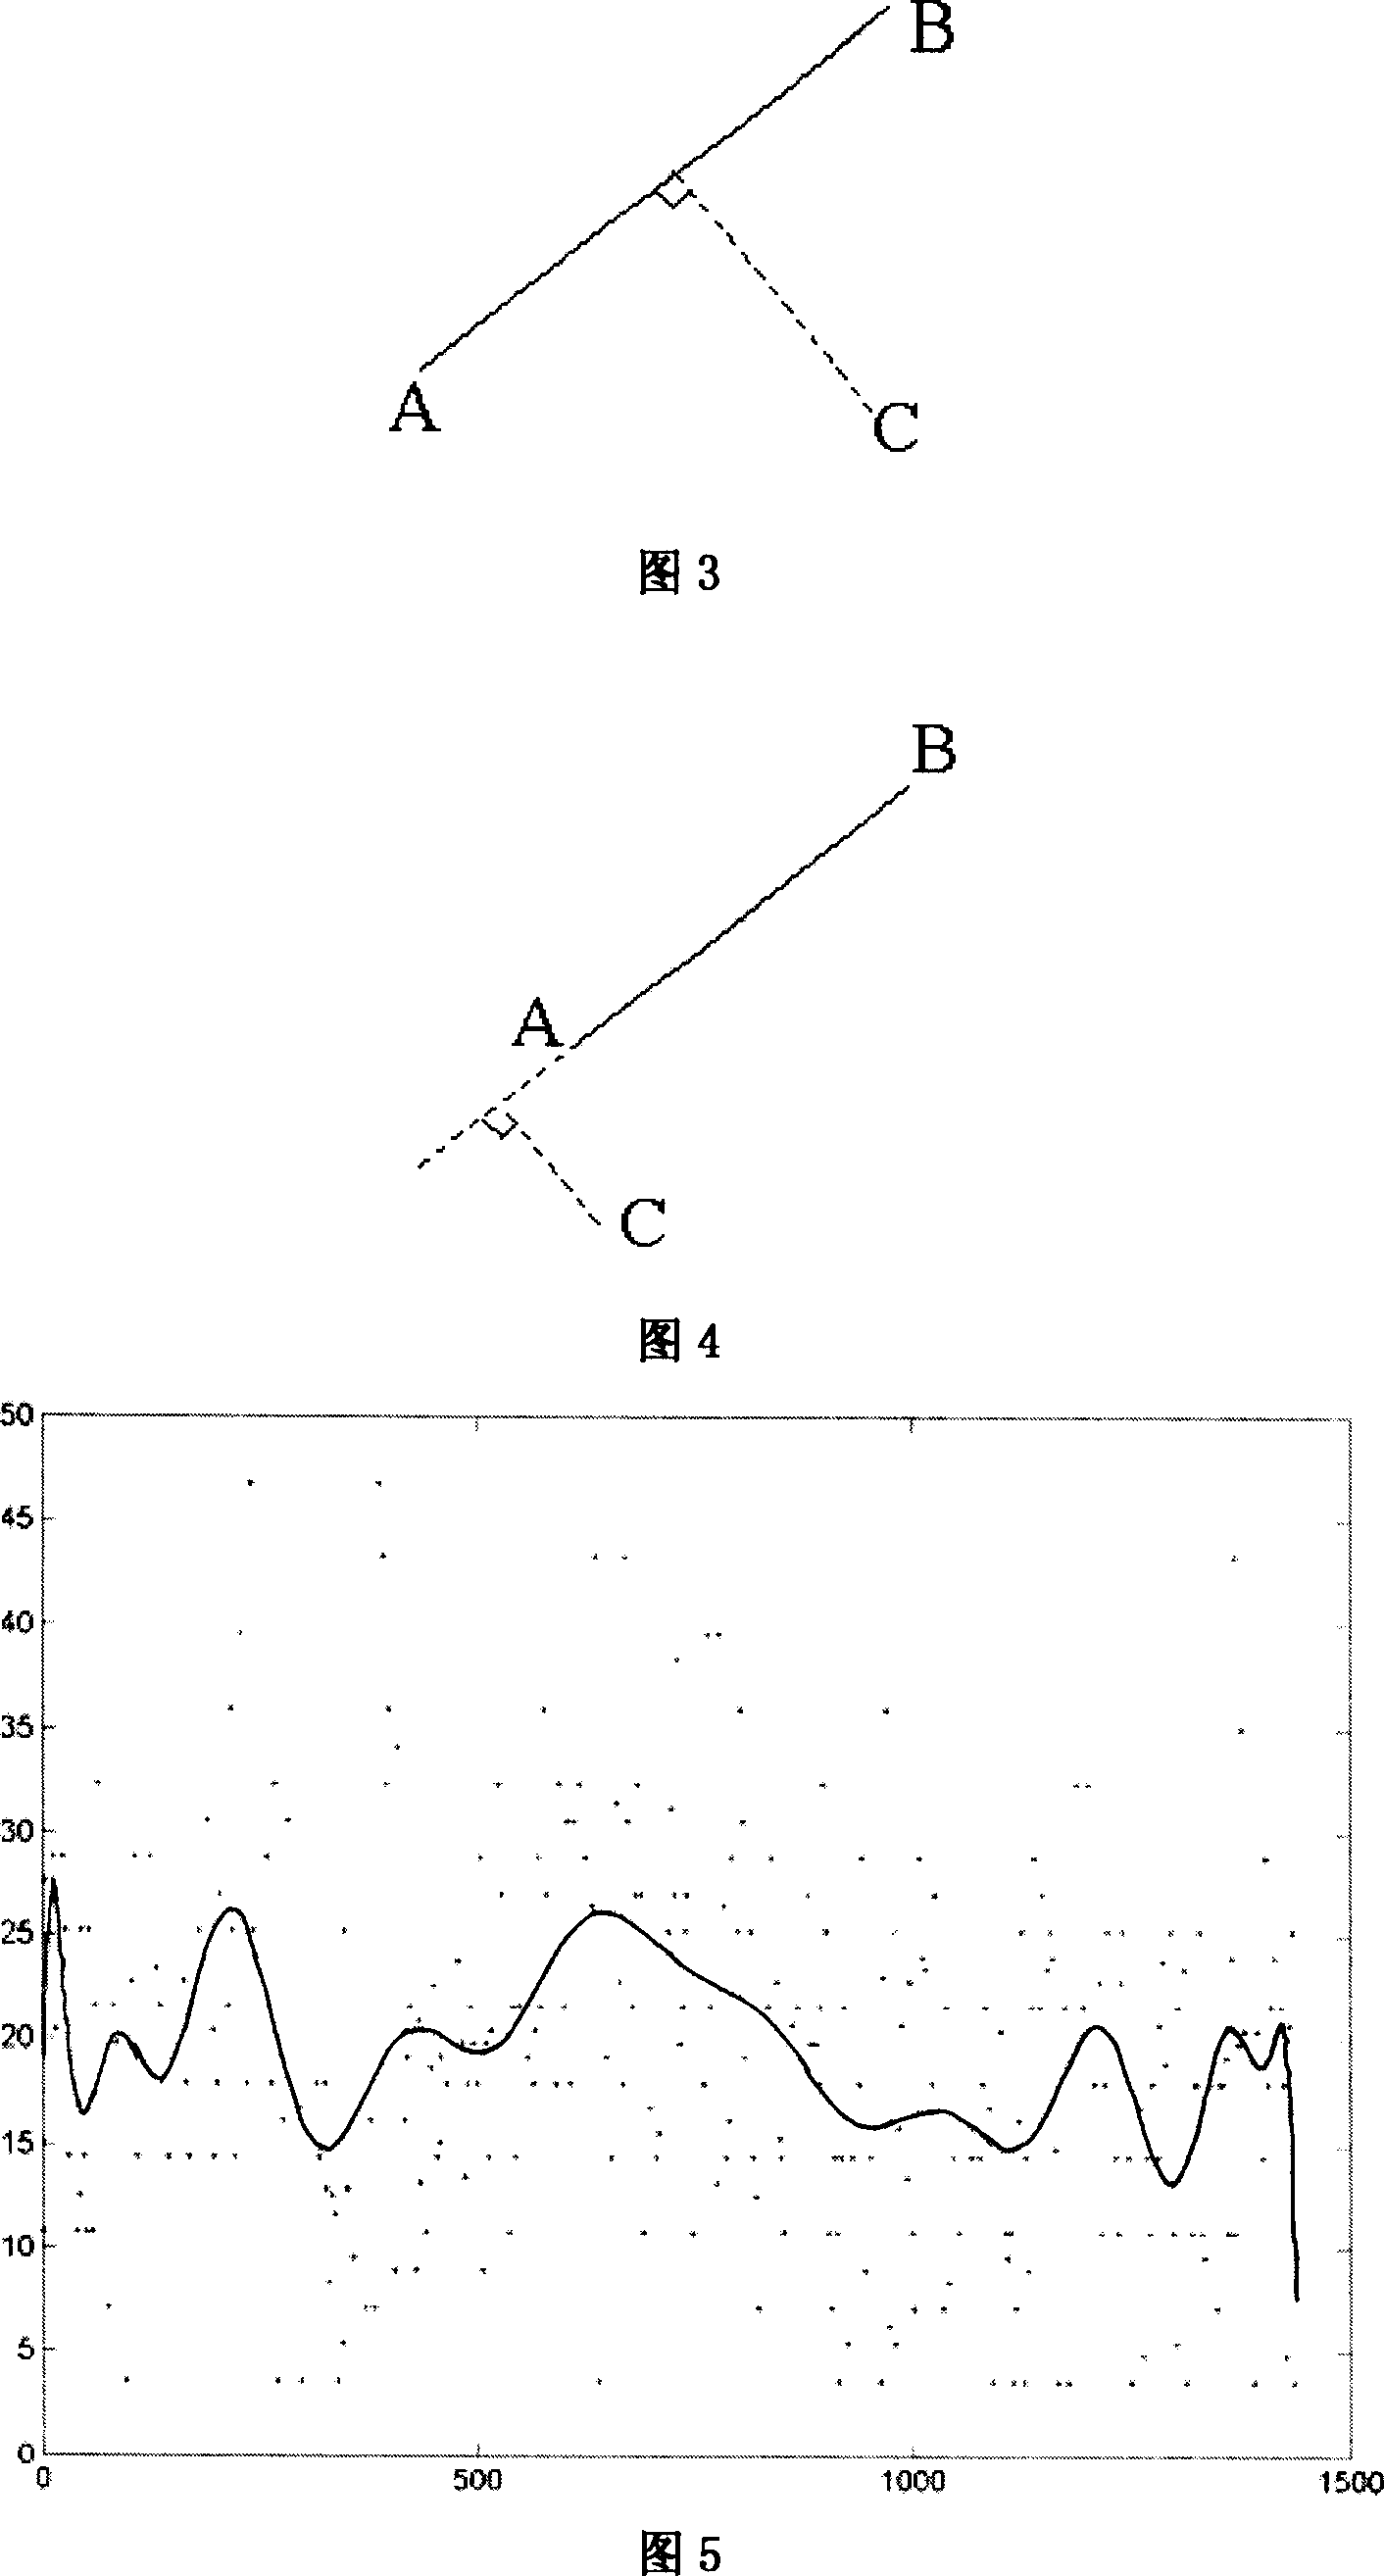 Method for forecasting reaching station of bus